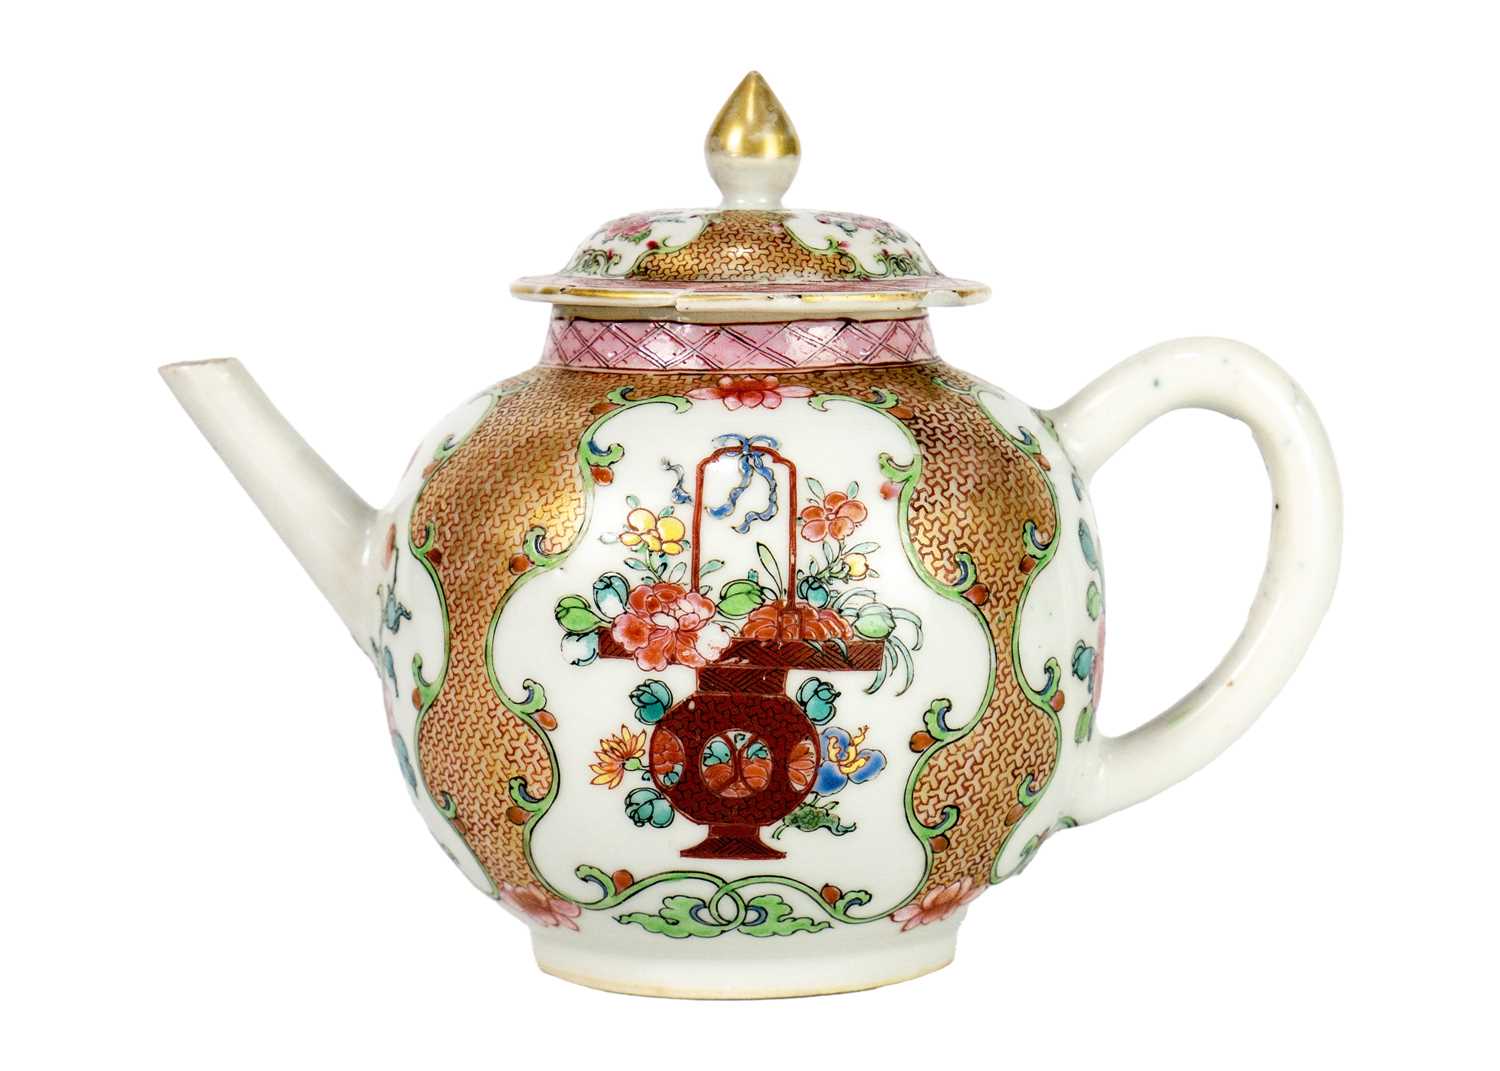 A Chinese porcelain teapot, 18th century. - Image 2 of 6